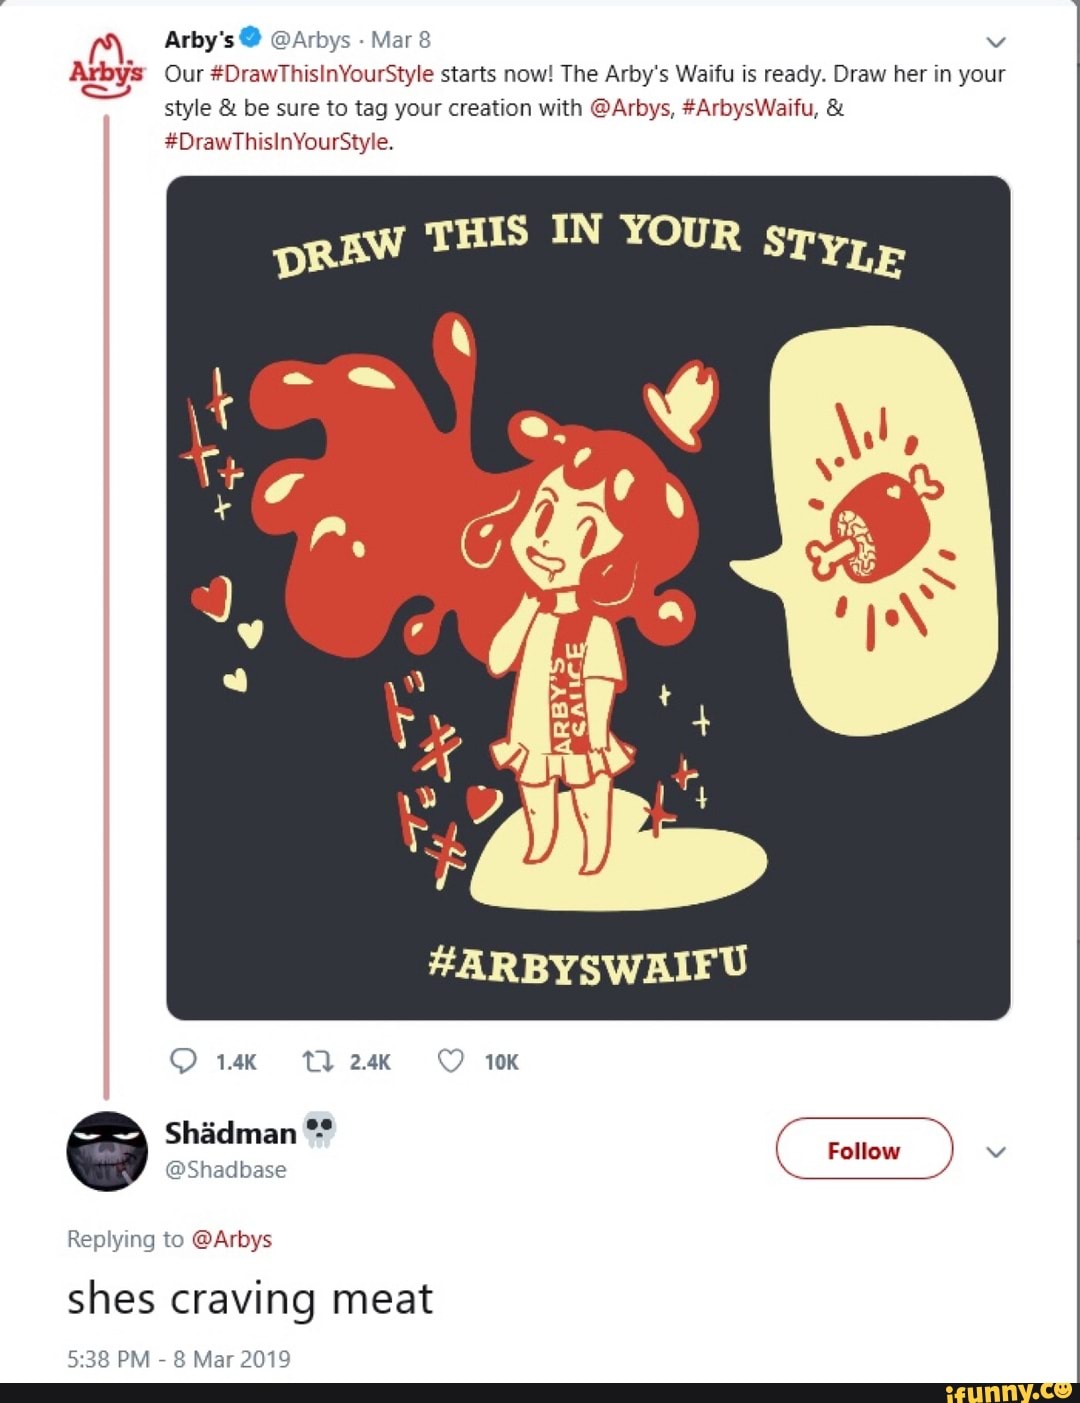 Mar 8 Y Arbys Our DrawThisinYourStyle starts now! The Arby's Waifu is